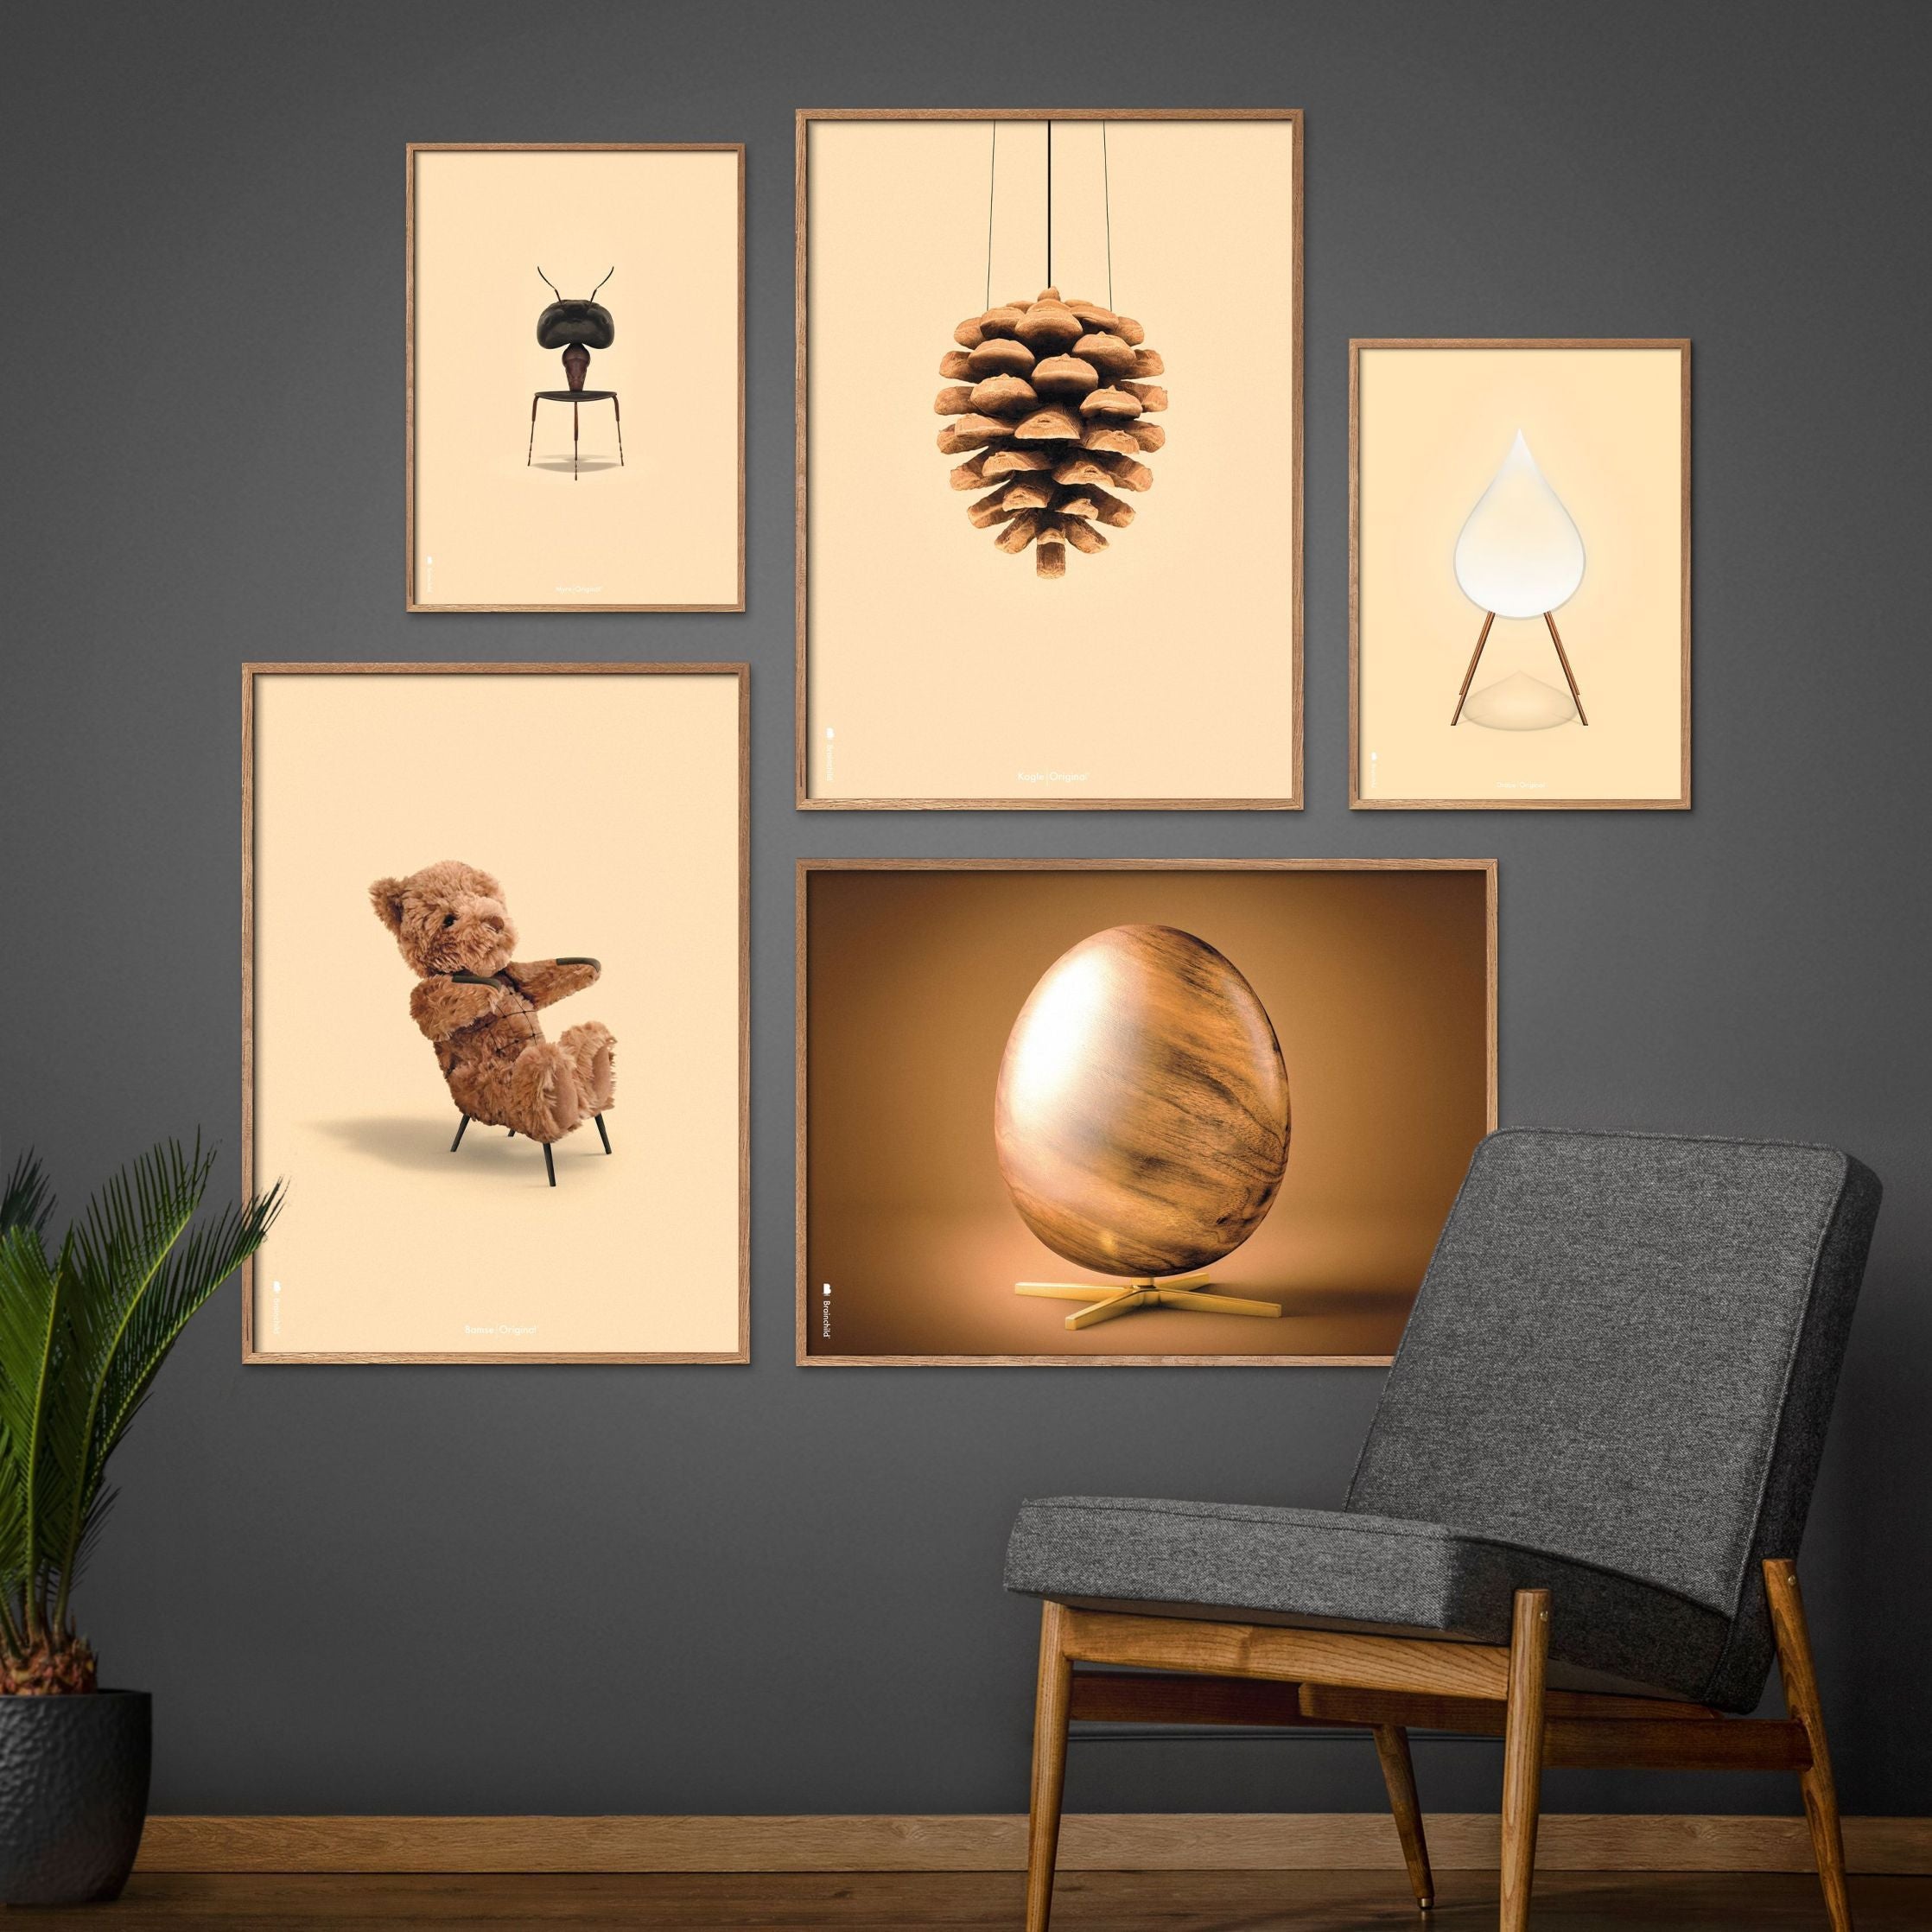 Brainchild Pine Cone Classic Poster, Frame Made Of Light Wood 50x70 Cm, Sand Colored Background